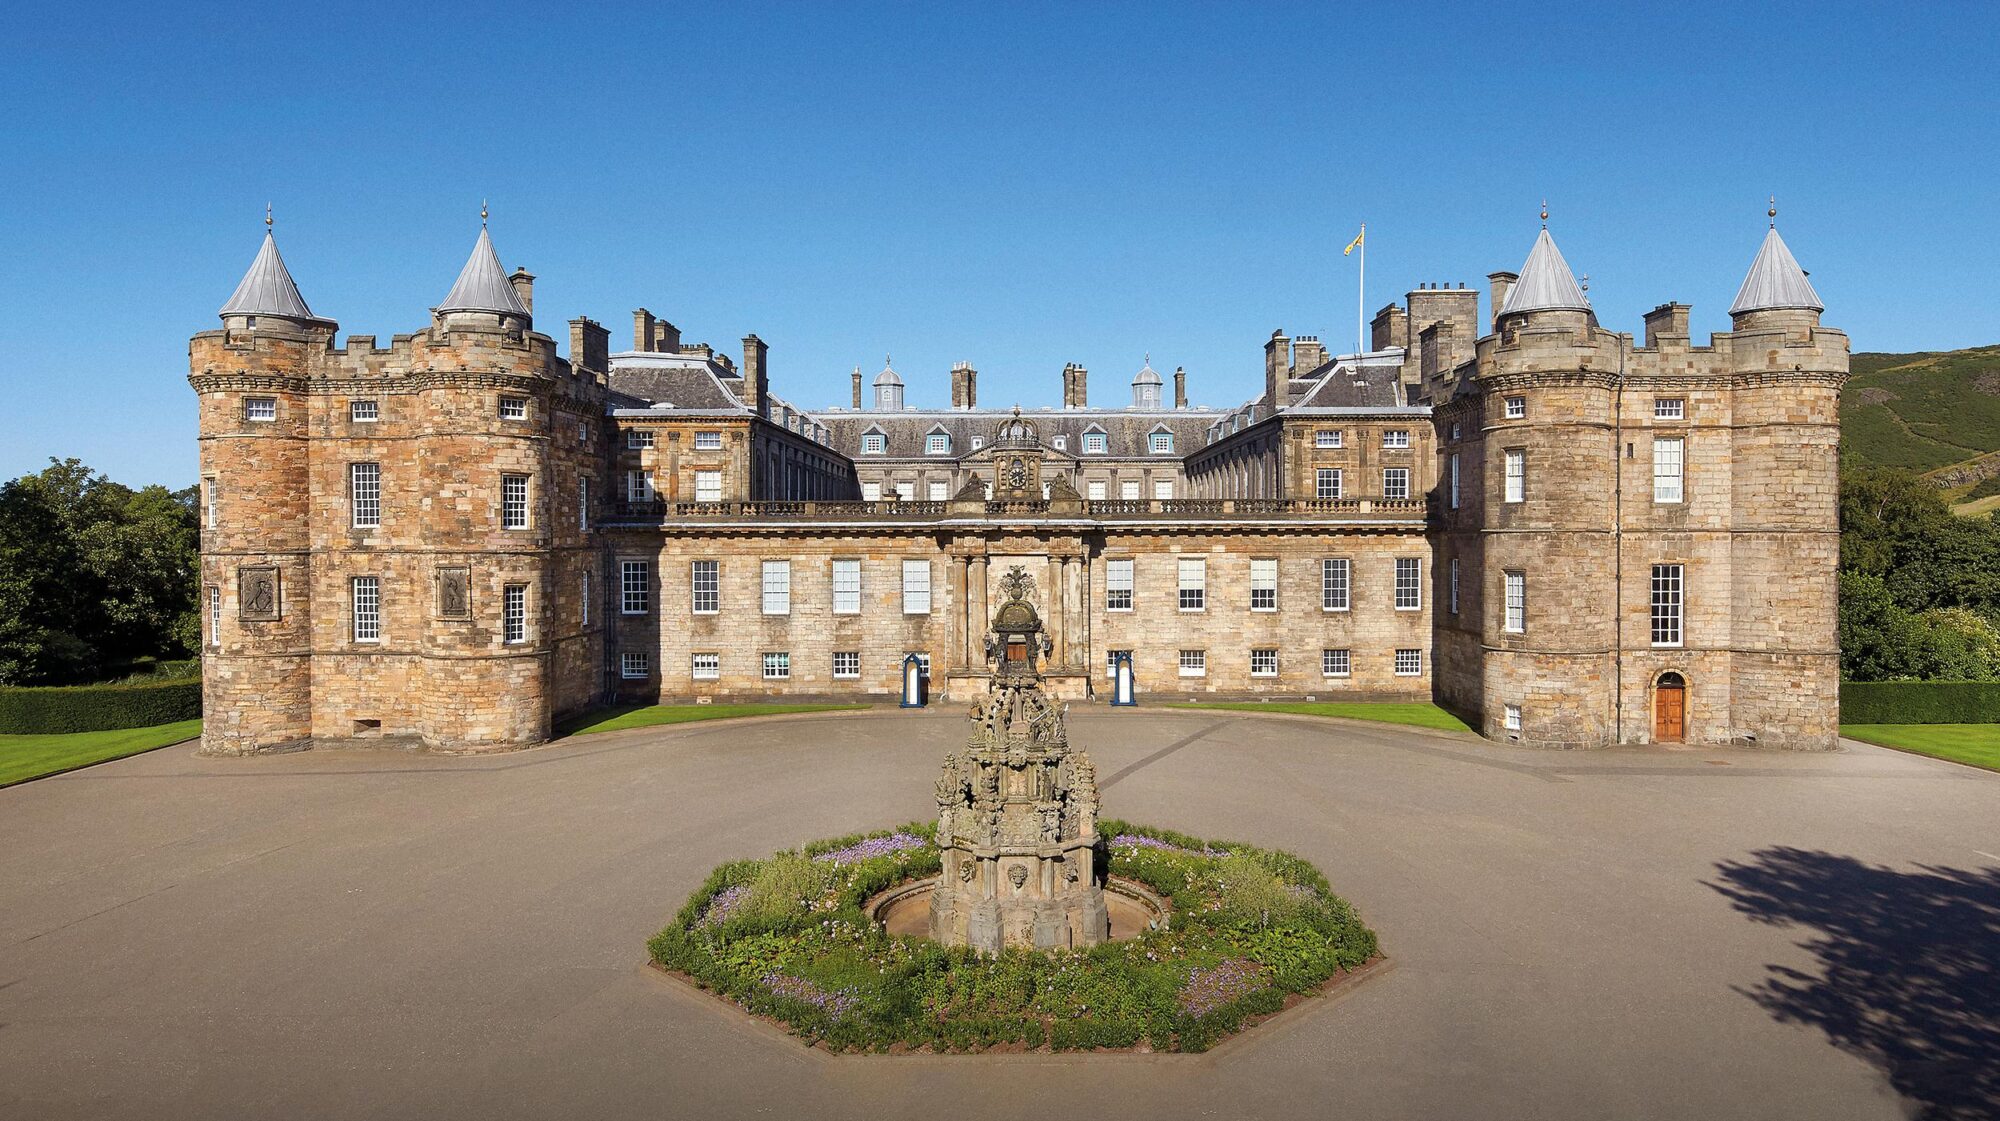 The Palace of Holyroodhouse in Edinburgh will welcome visitors from Monday, 26 April. (Photo credit: Royal Collection Trust / © Her Majesty Queen Elizabeth II 2021)